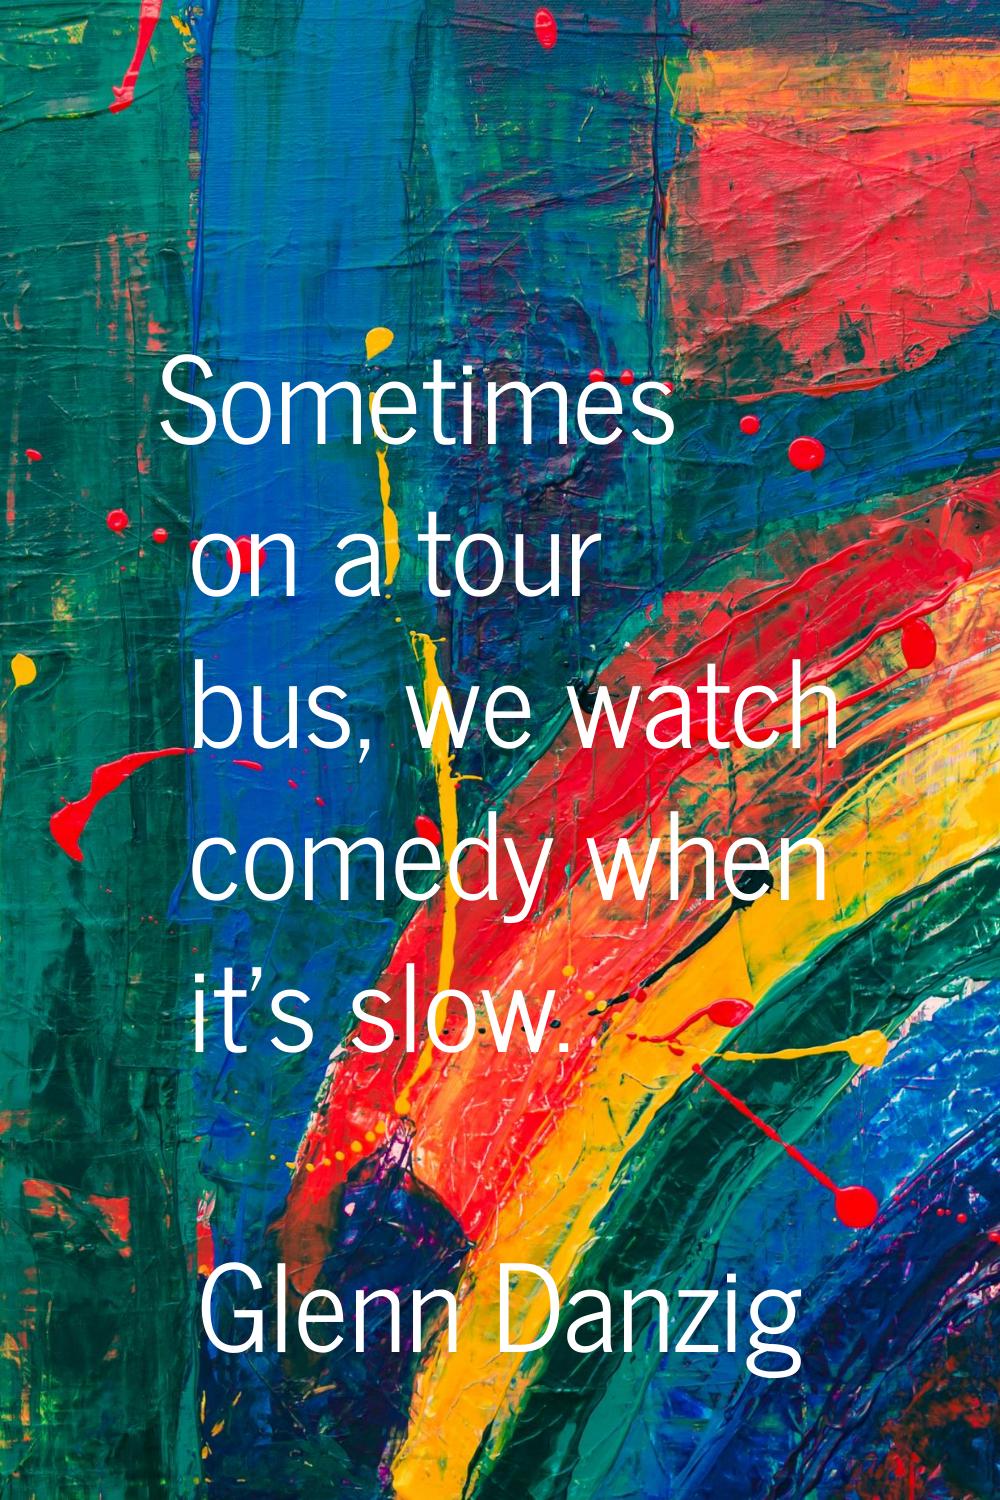 Sometimes on a tour bus, we watch comedy when it's slow.